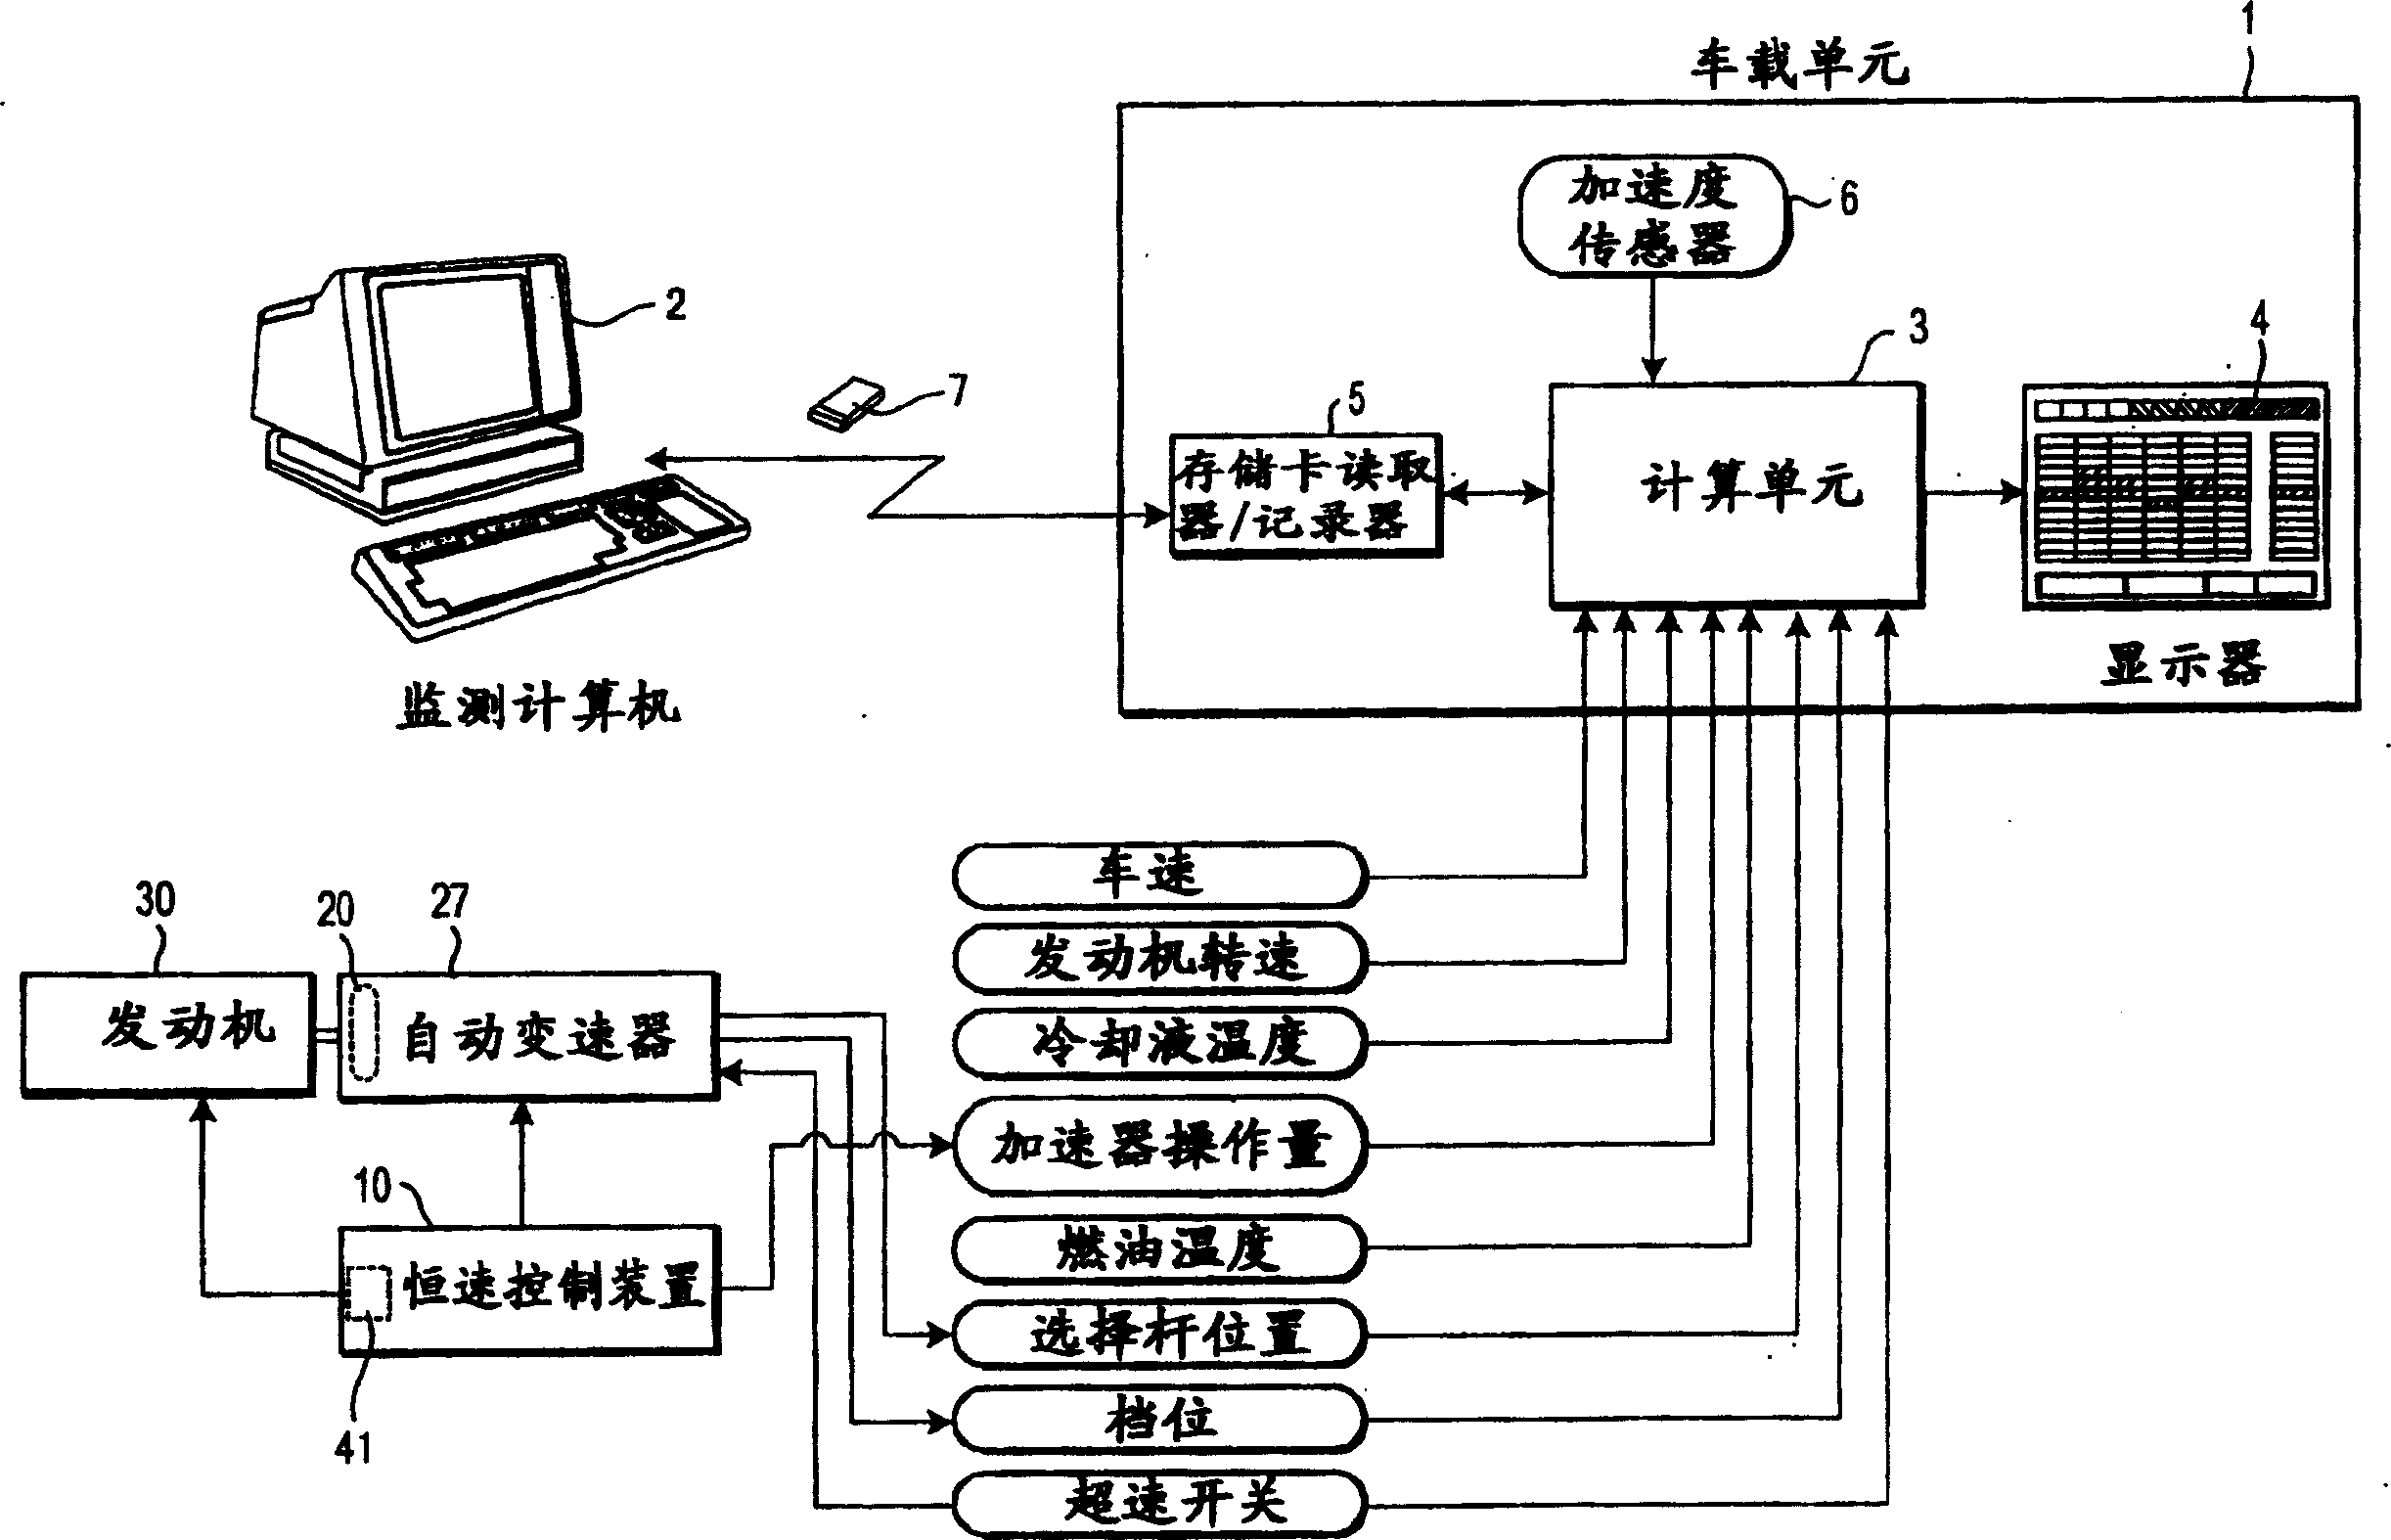 Vehicle running condition appraising system and its appraising method